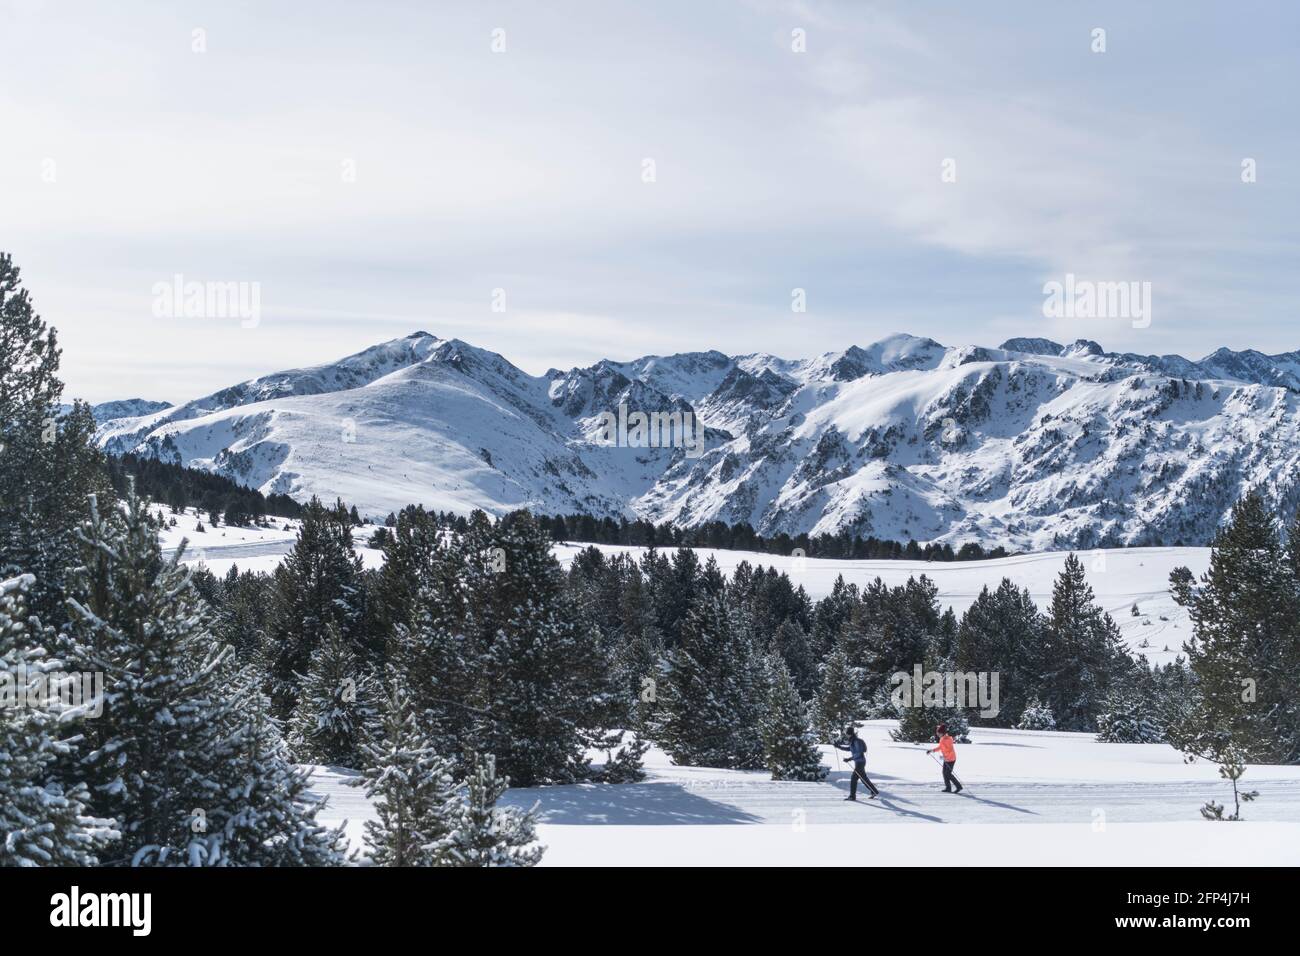 A couple is skiing through a snowy landscape Stock Photo